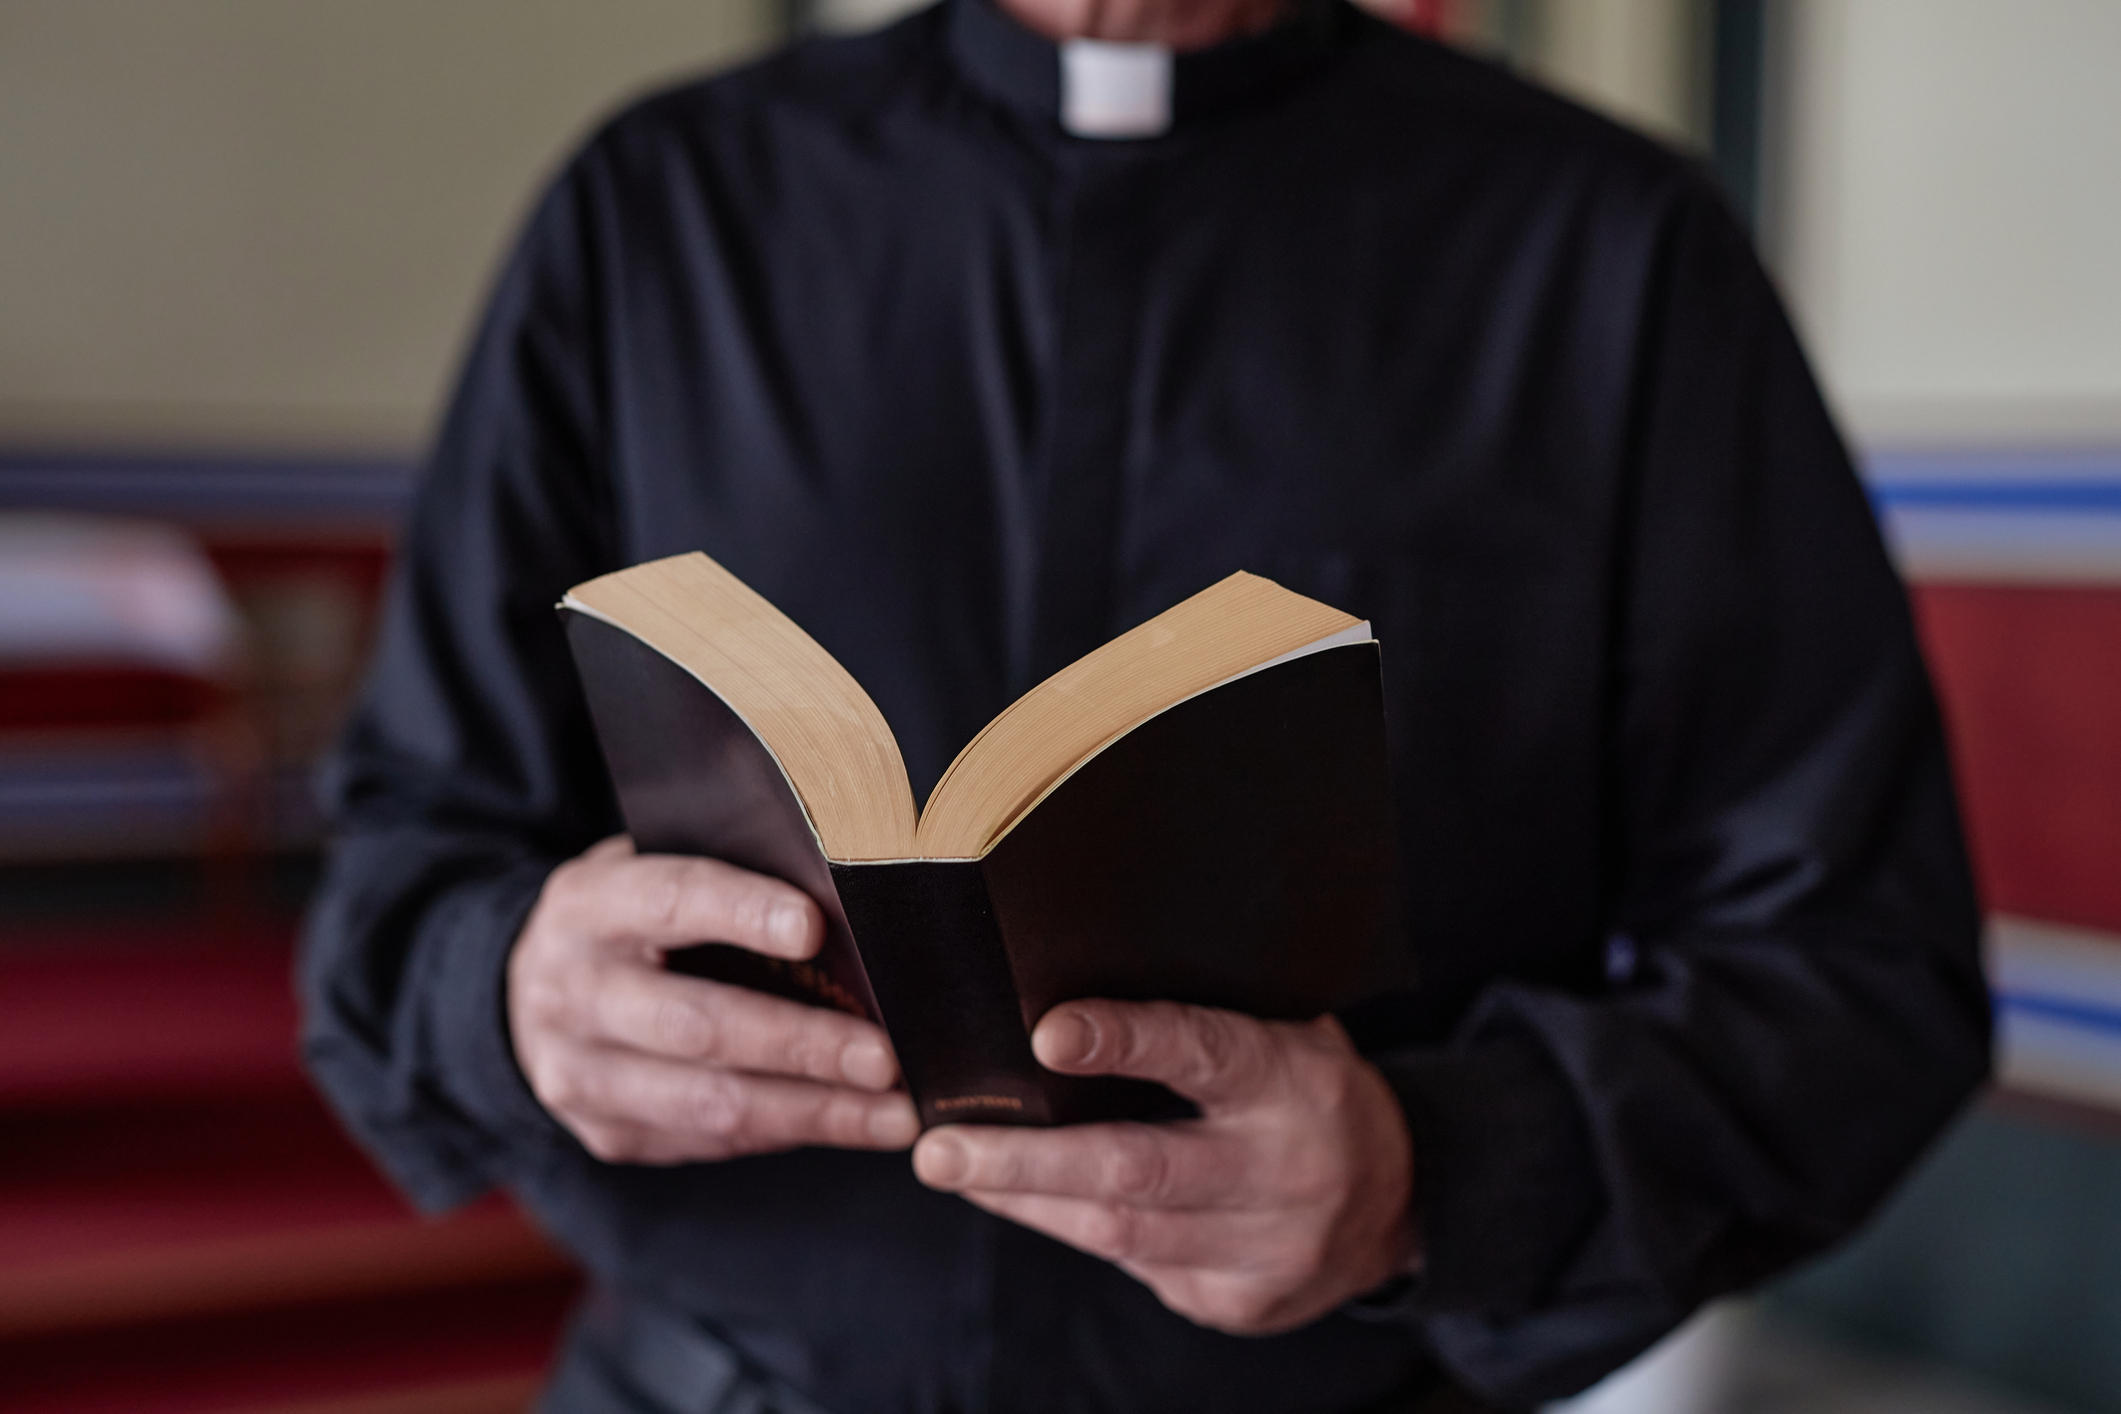 A priest holding an open book, wearing traditional clerical clothing inside a building